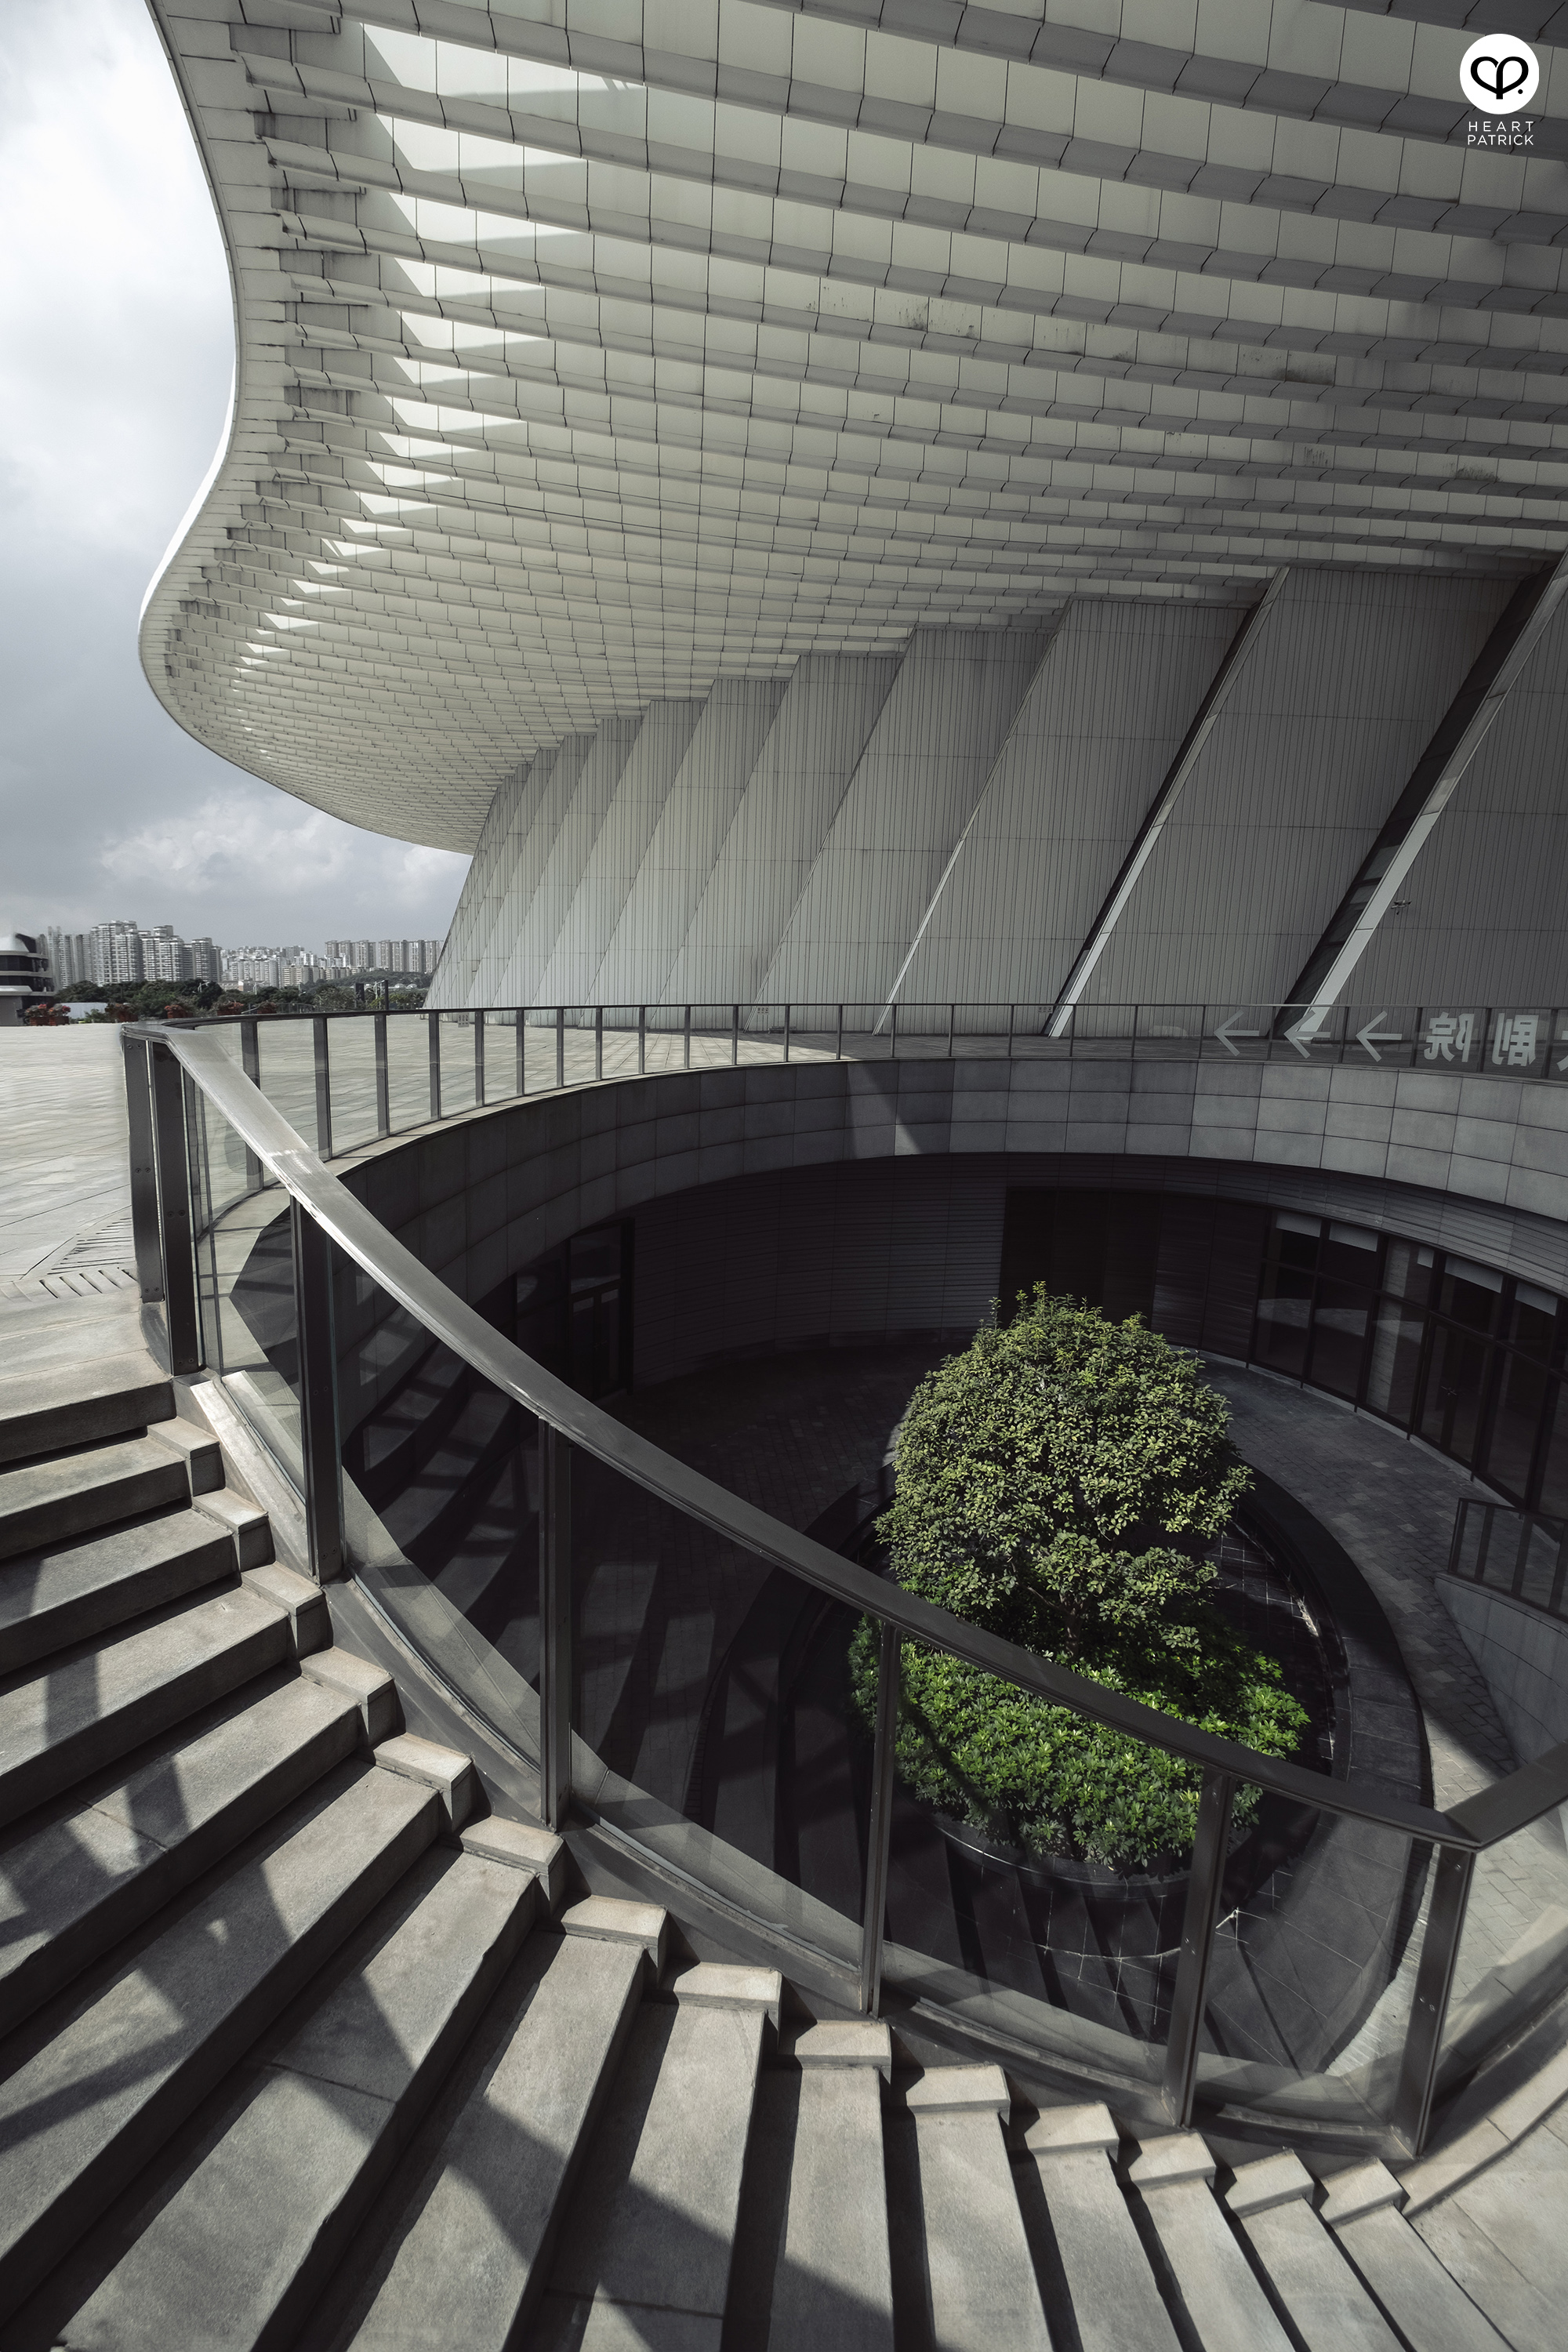 heartpatrick guangxi culture art center nanning gmp architects architecture photography